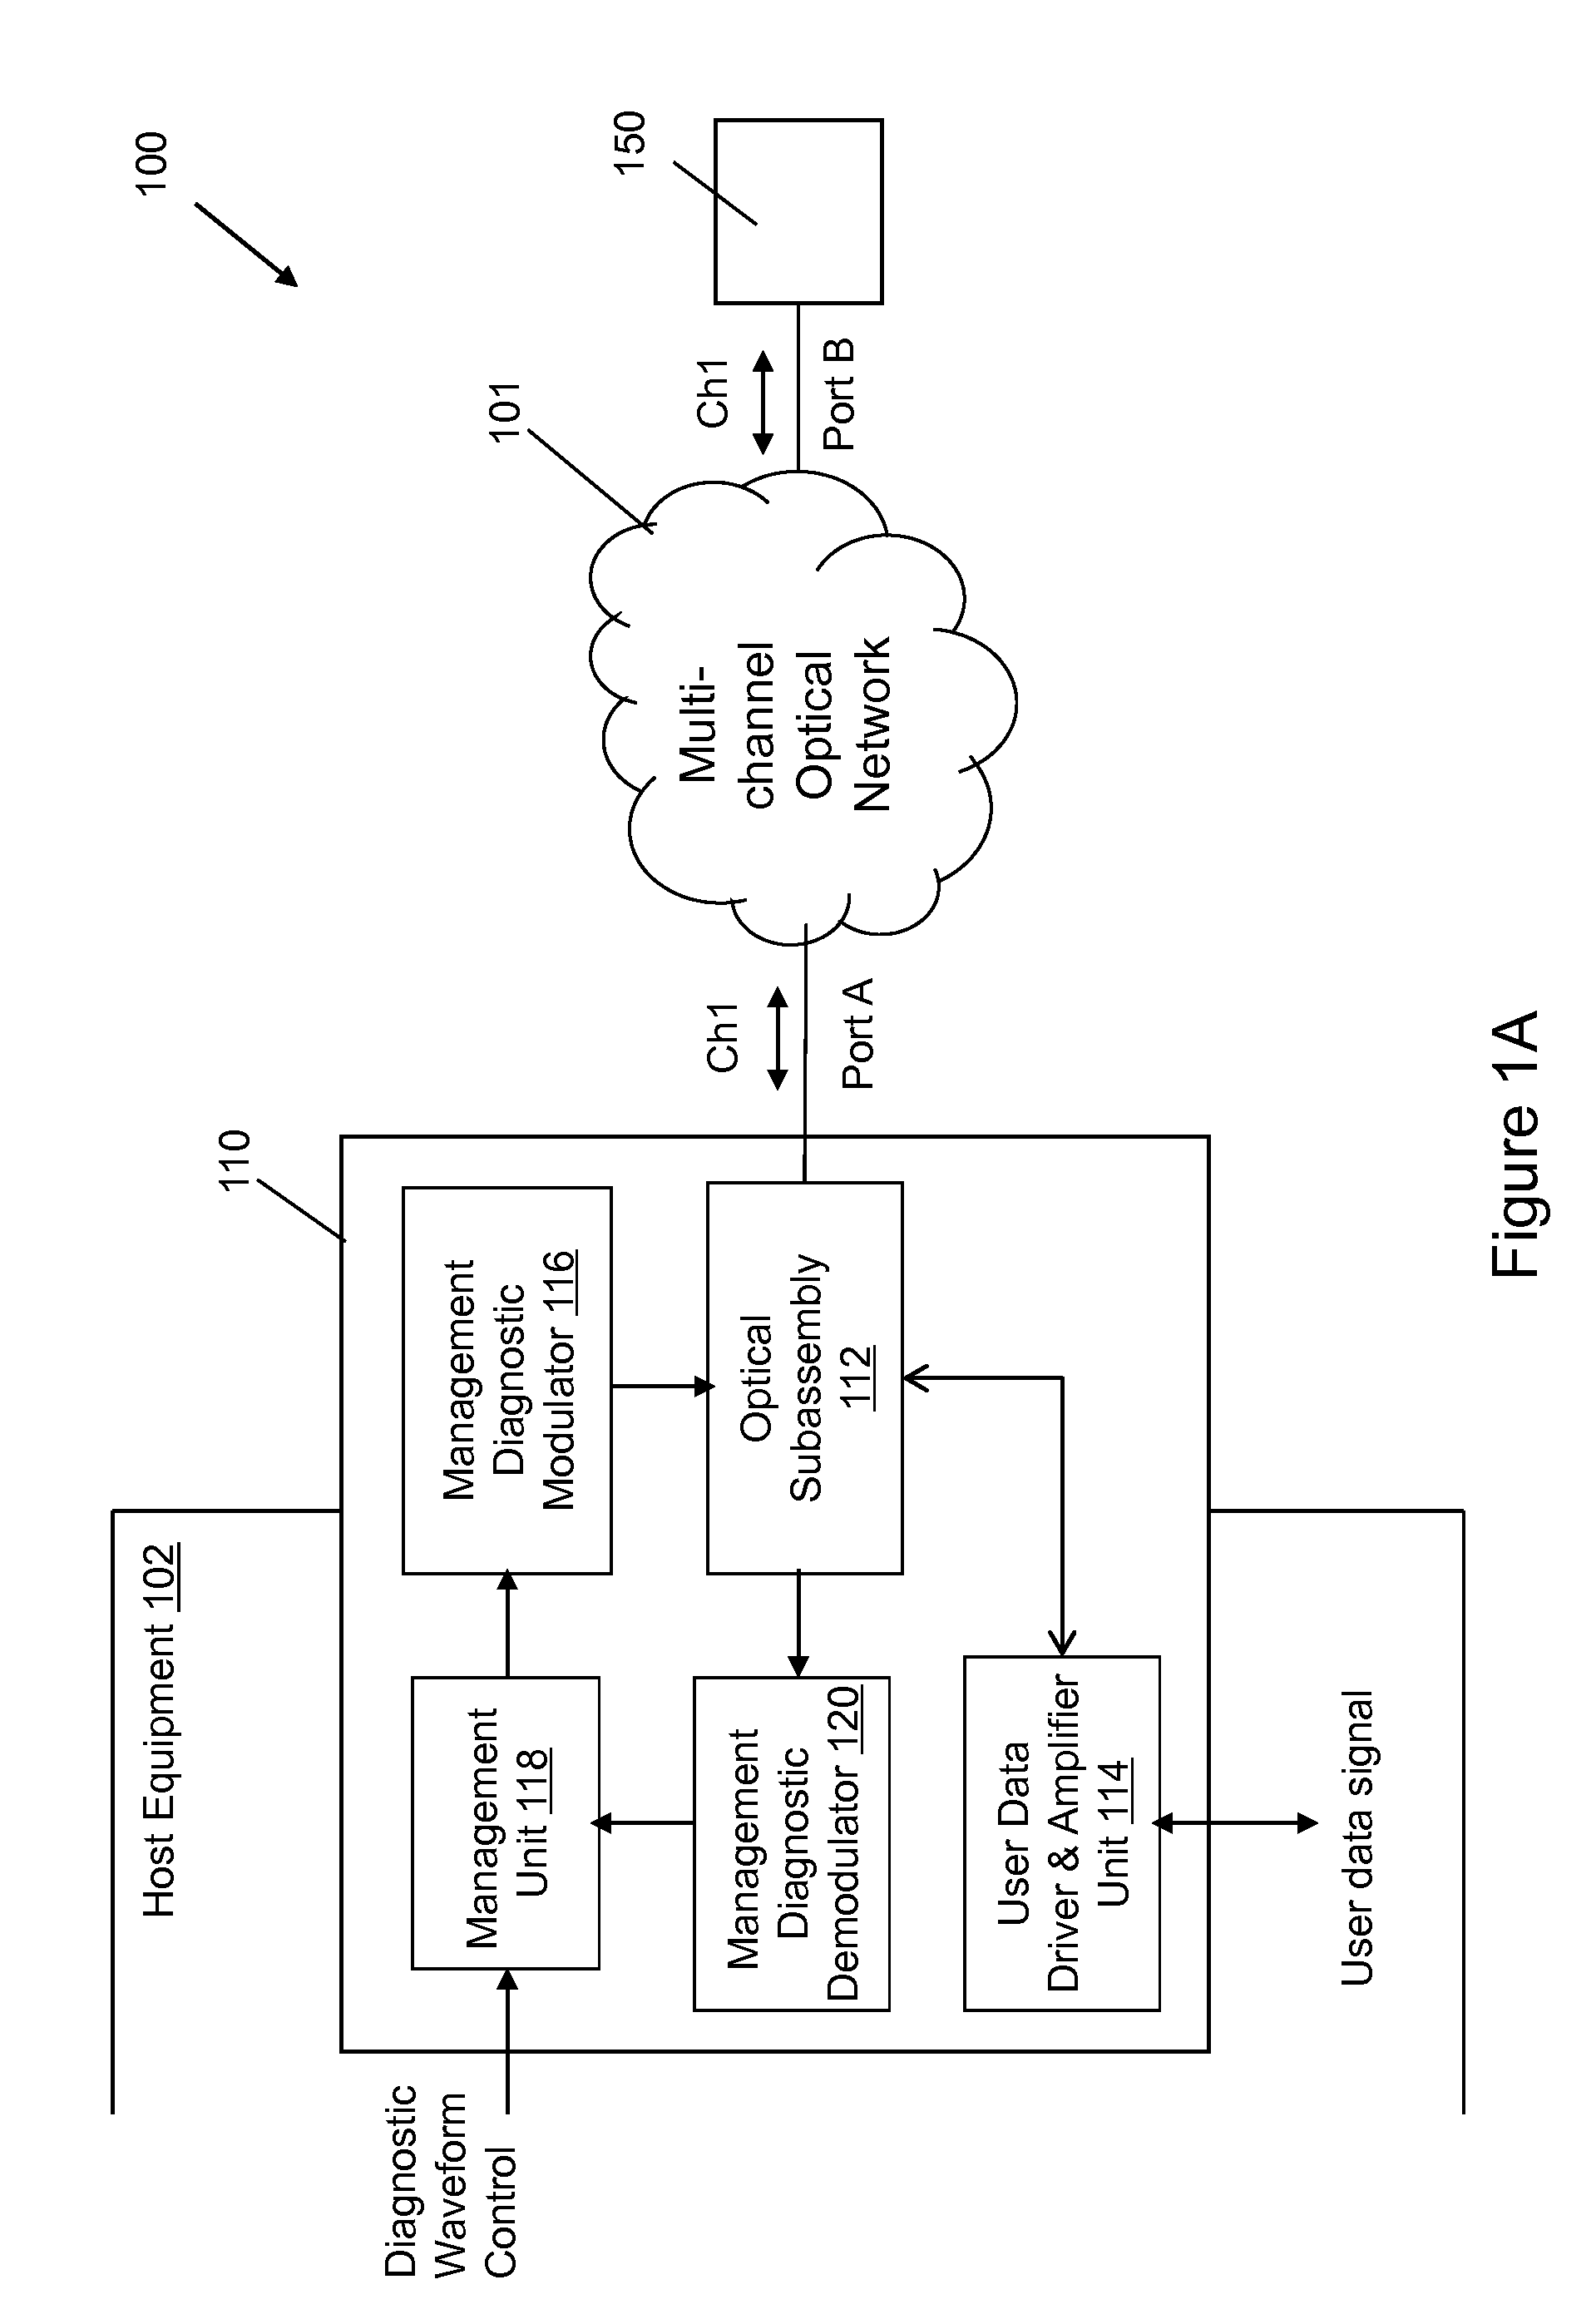 Optical network system and devices enabling data, diagnosis, and management communications